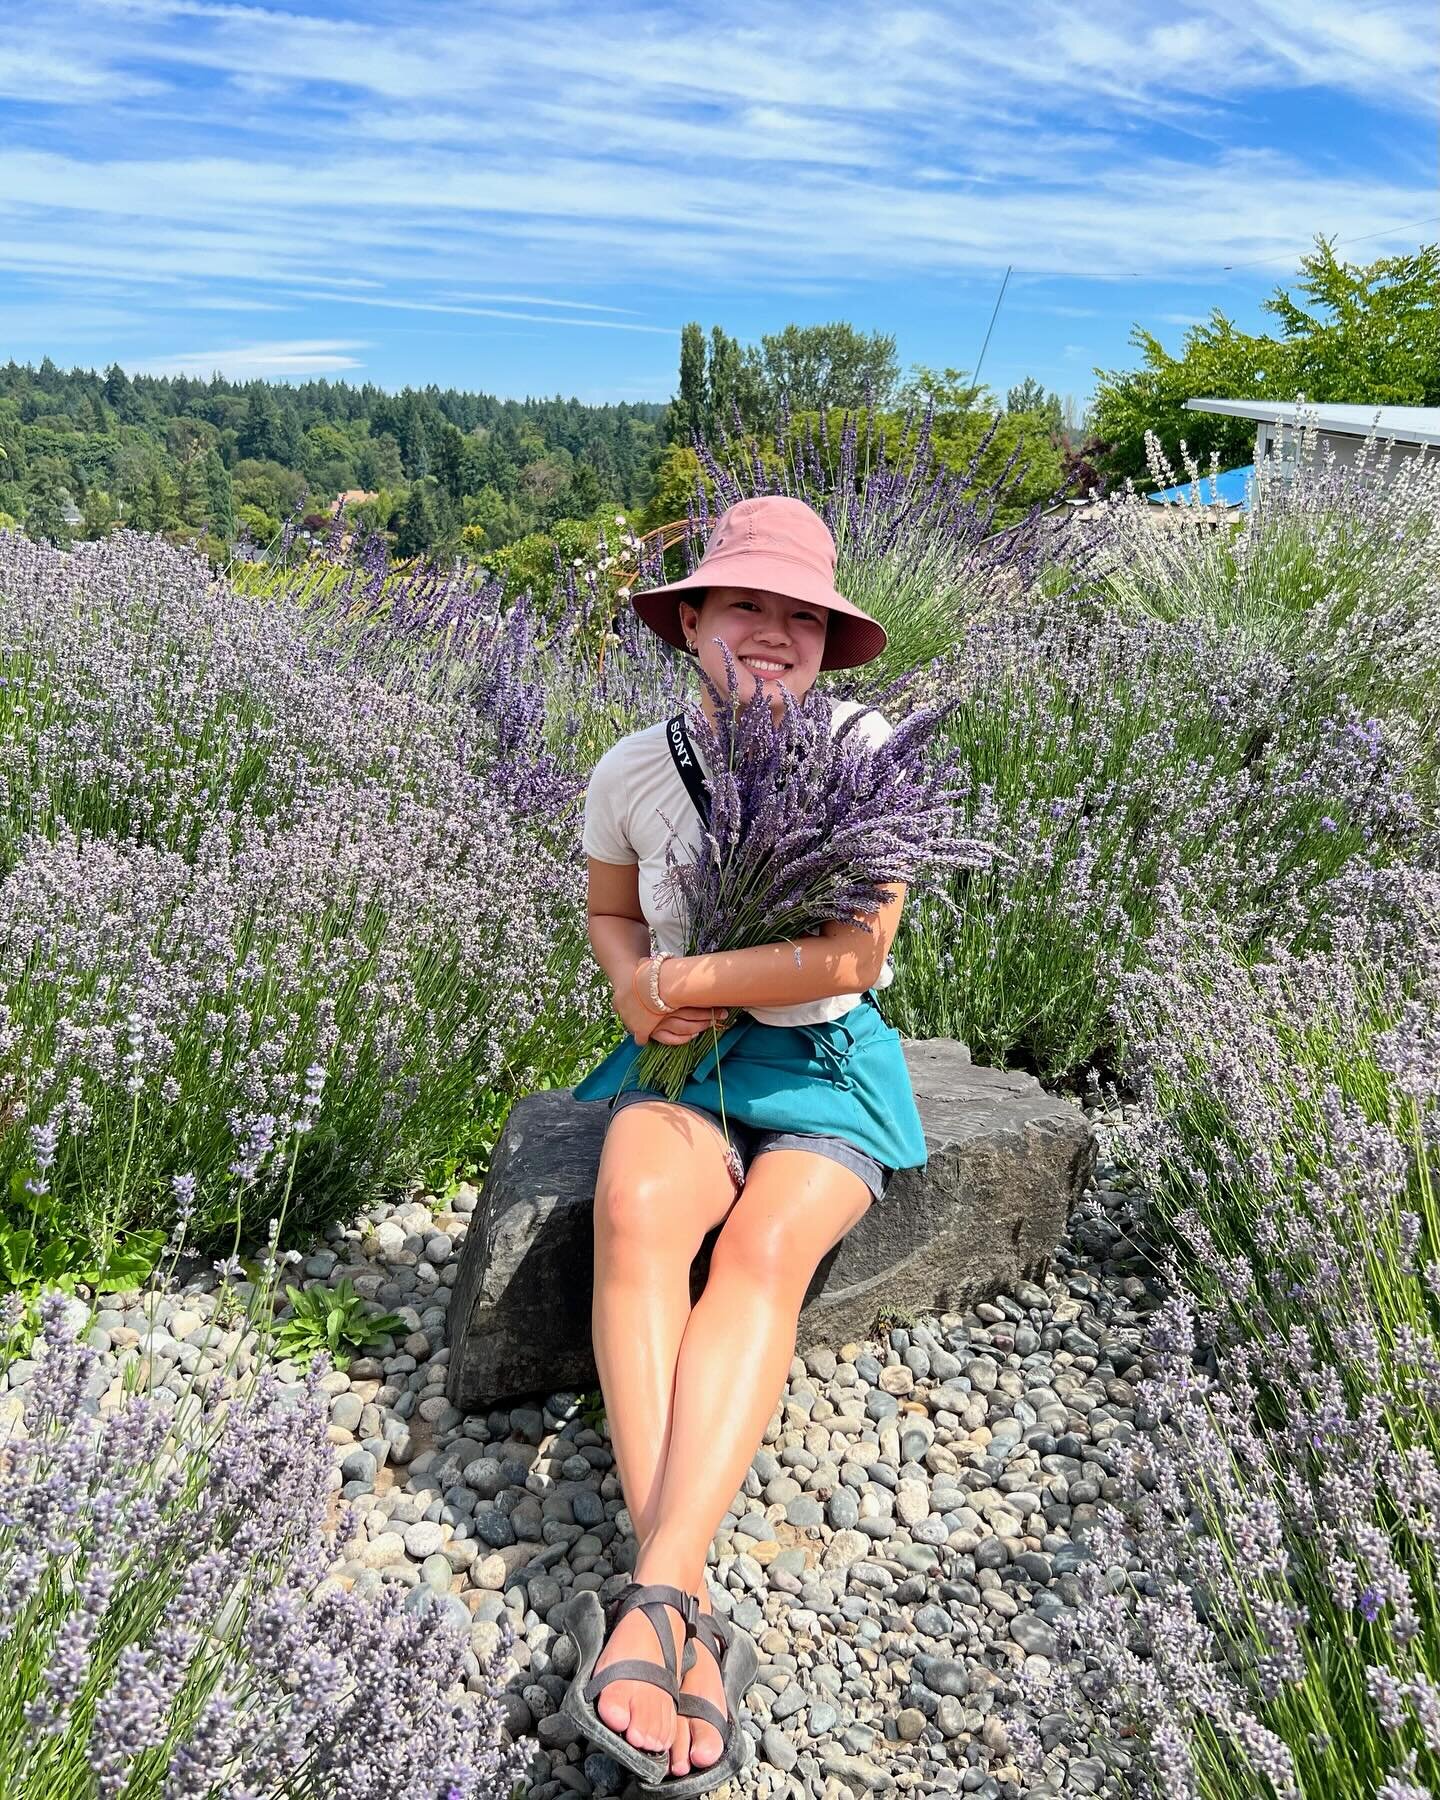 Applications for our summer 2024 internship are OPEN! Check out the link in our bio for more info! 

#lavenderinterns #lavenderinternship #lavenderfarm #farminternship